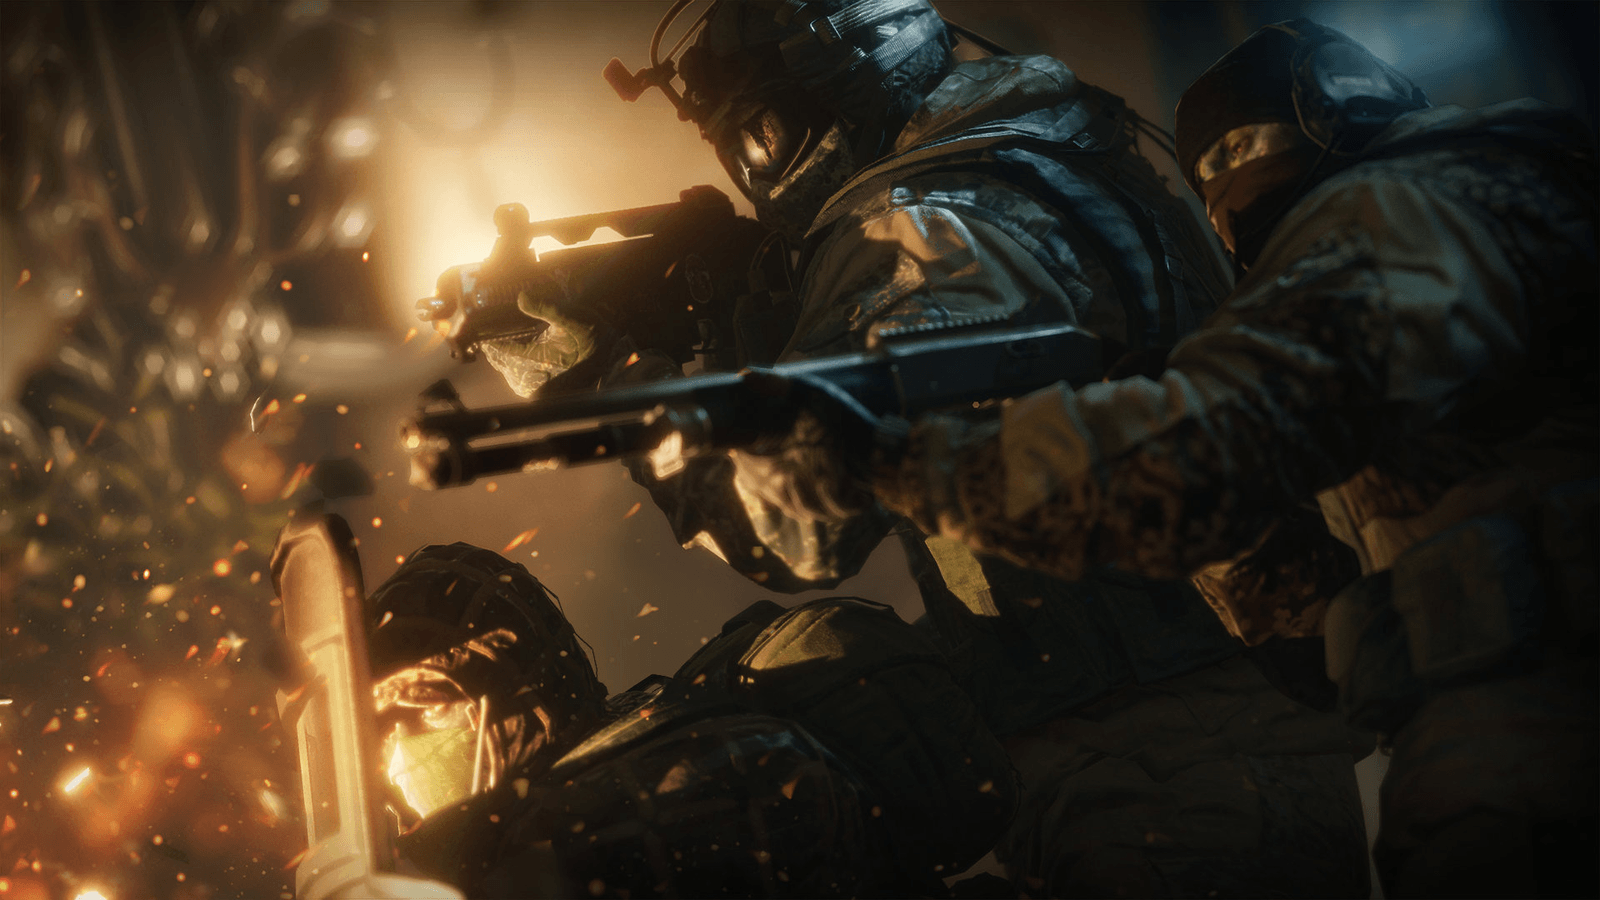 Rainbow Six Siege's 'Operation Black Ice' free update adds a new map